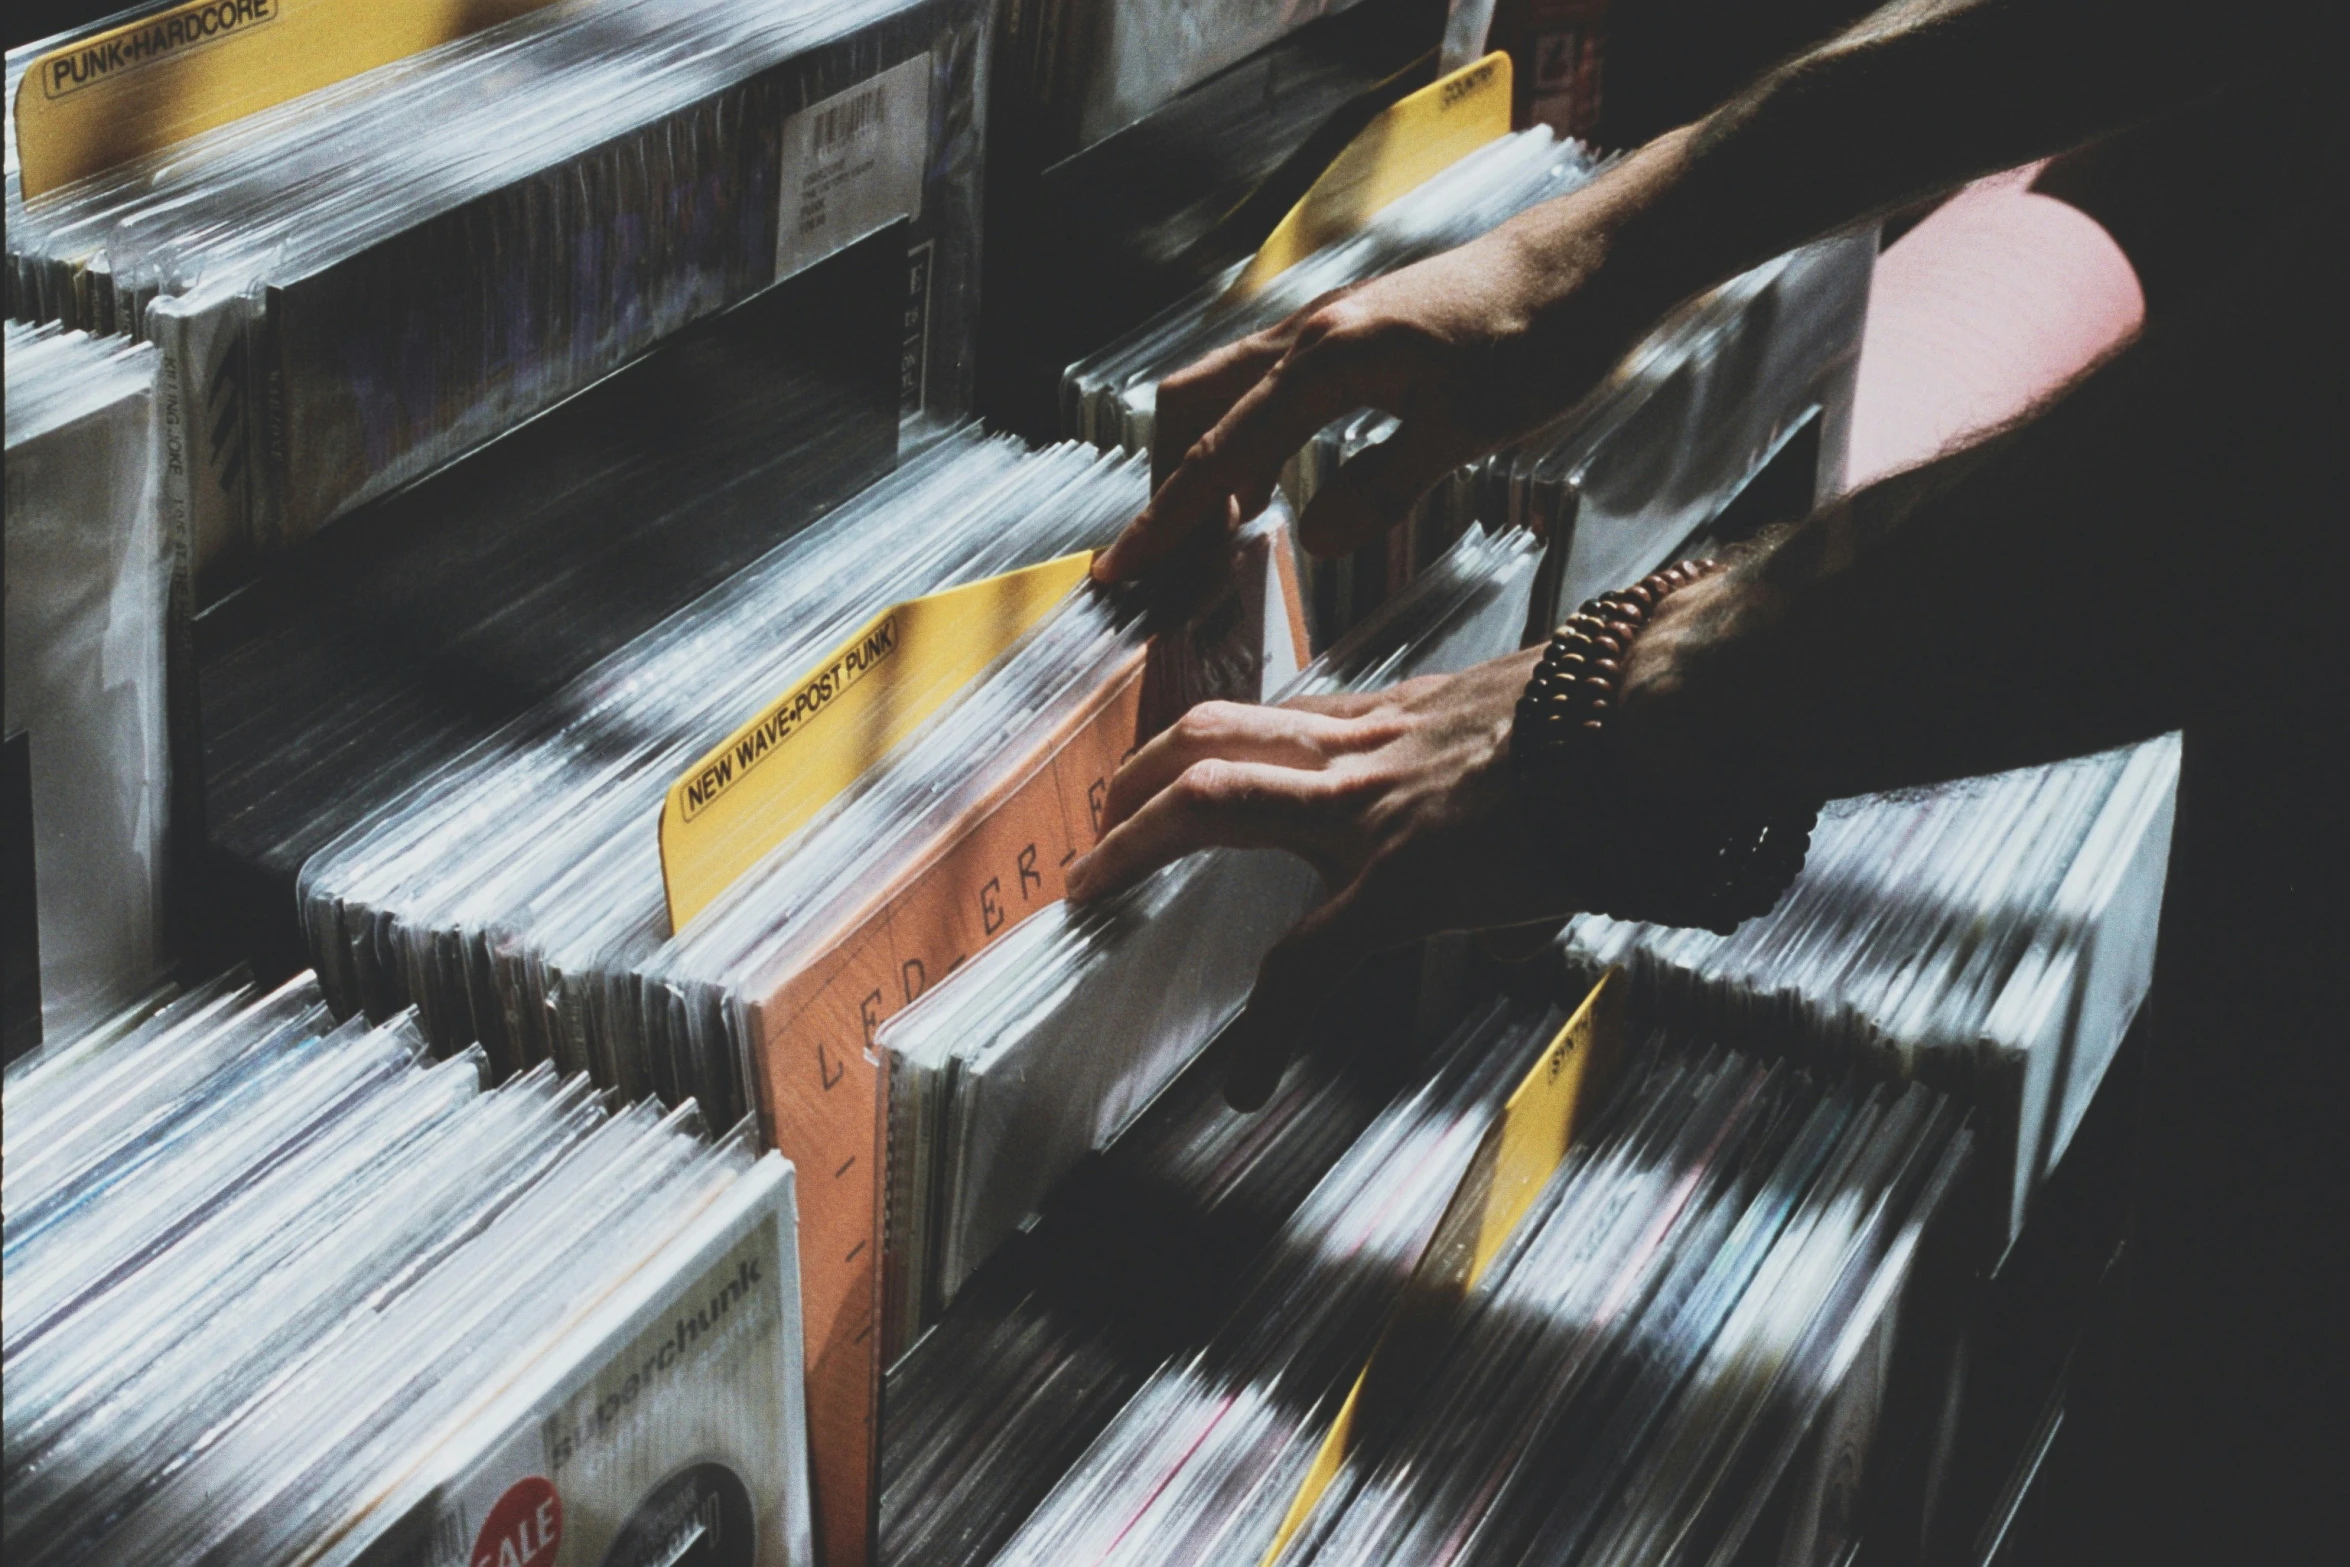 a person's hand moving a stack of records from boxes to a record player